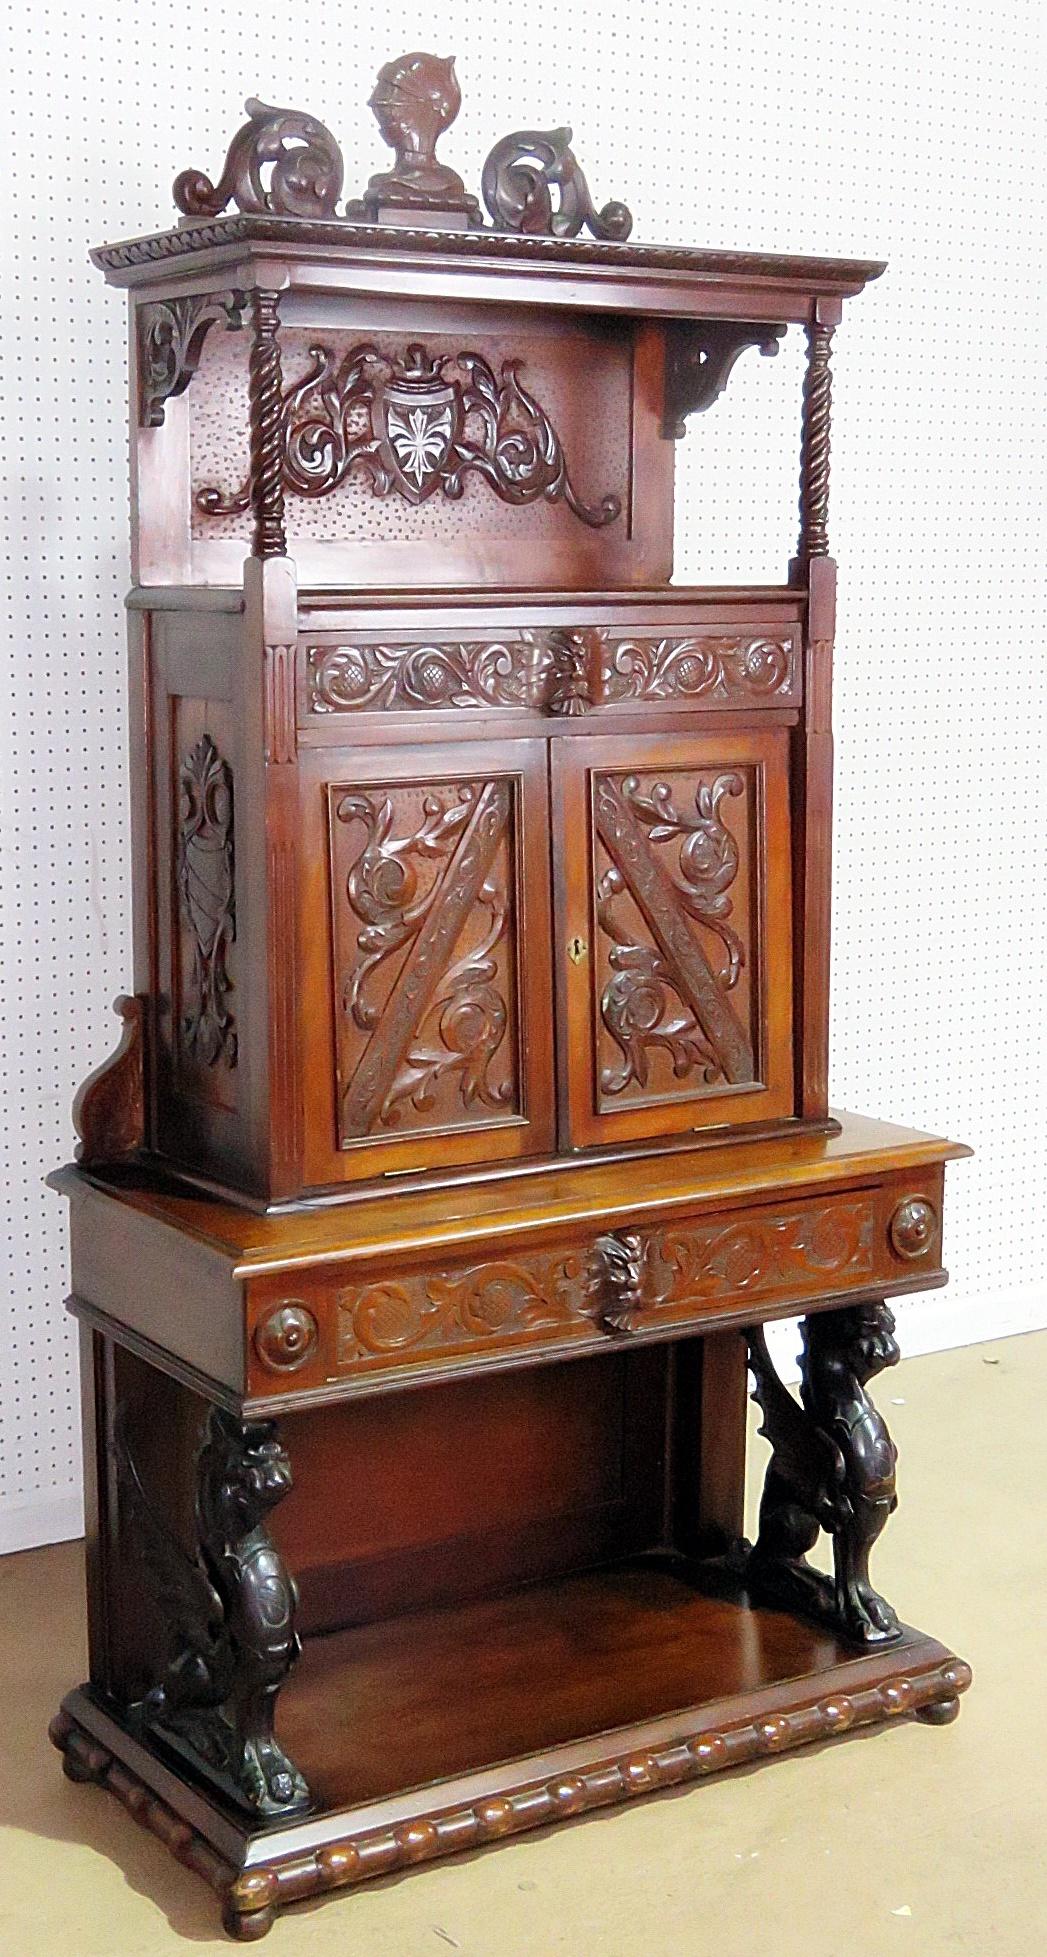 Italian Renaissance style secretary desk with a drop desk containing several compartments over 1 drawer and winged griffins.